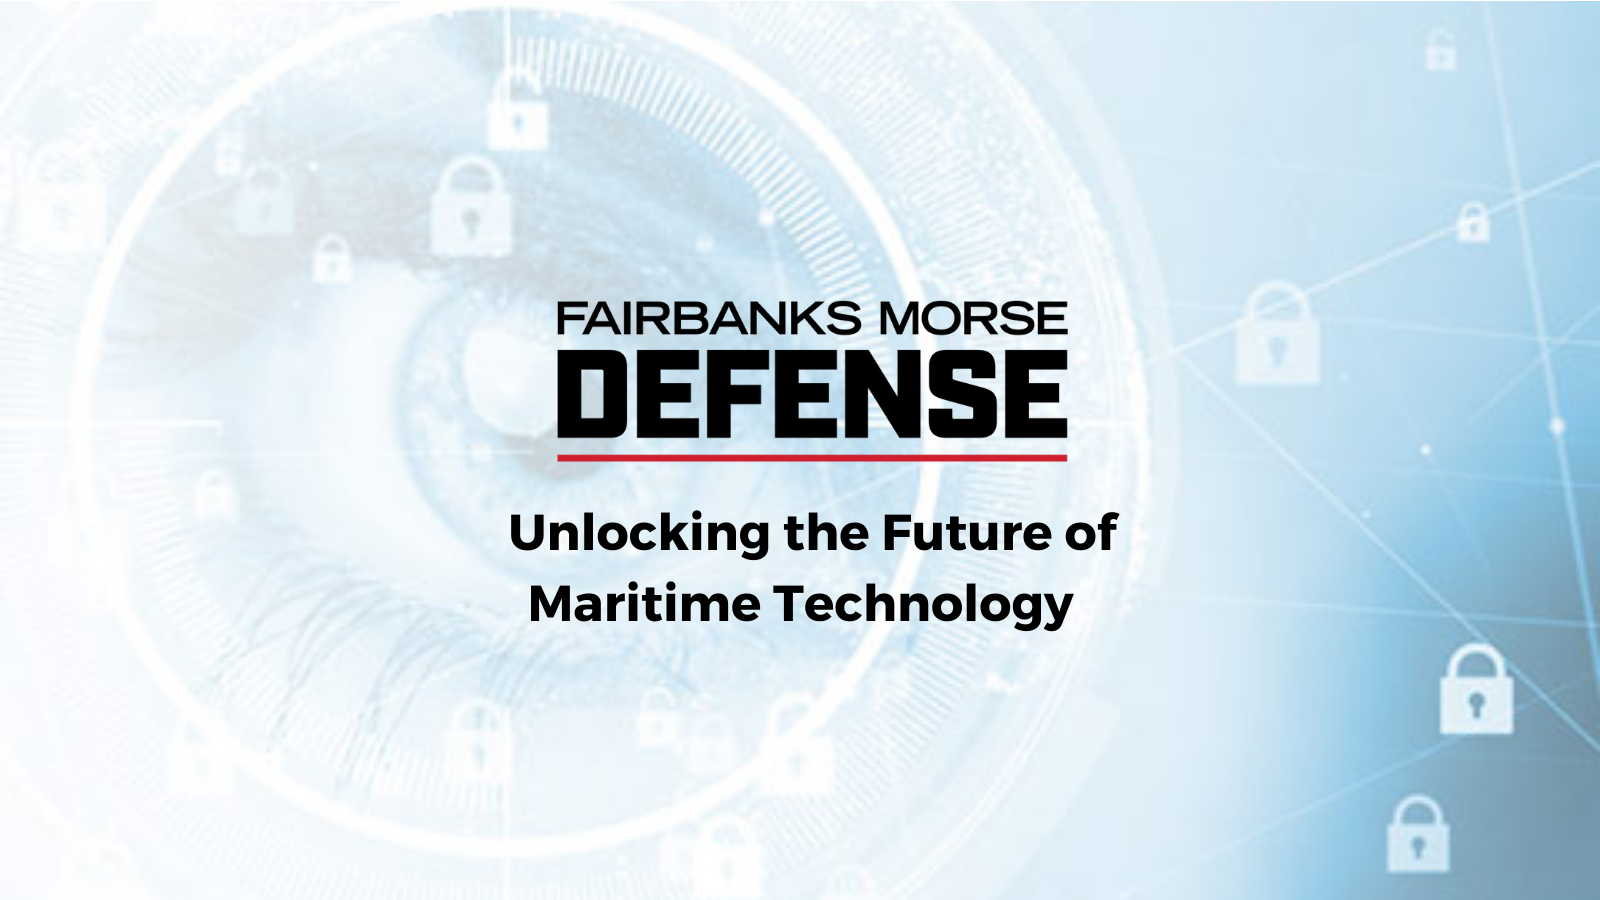 Fairbanks Morse Defense Advances Maritime Technology by Launching Technology Center of Excellence